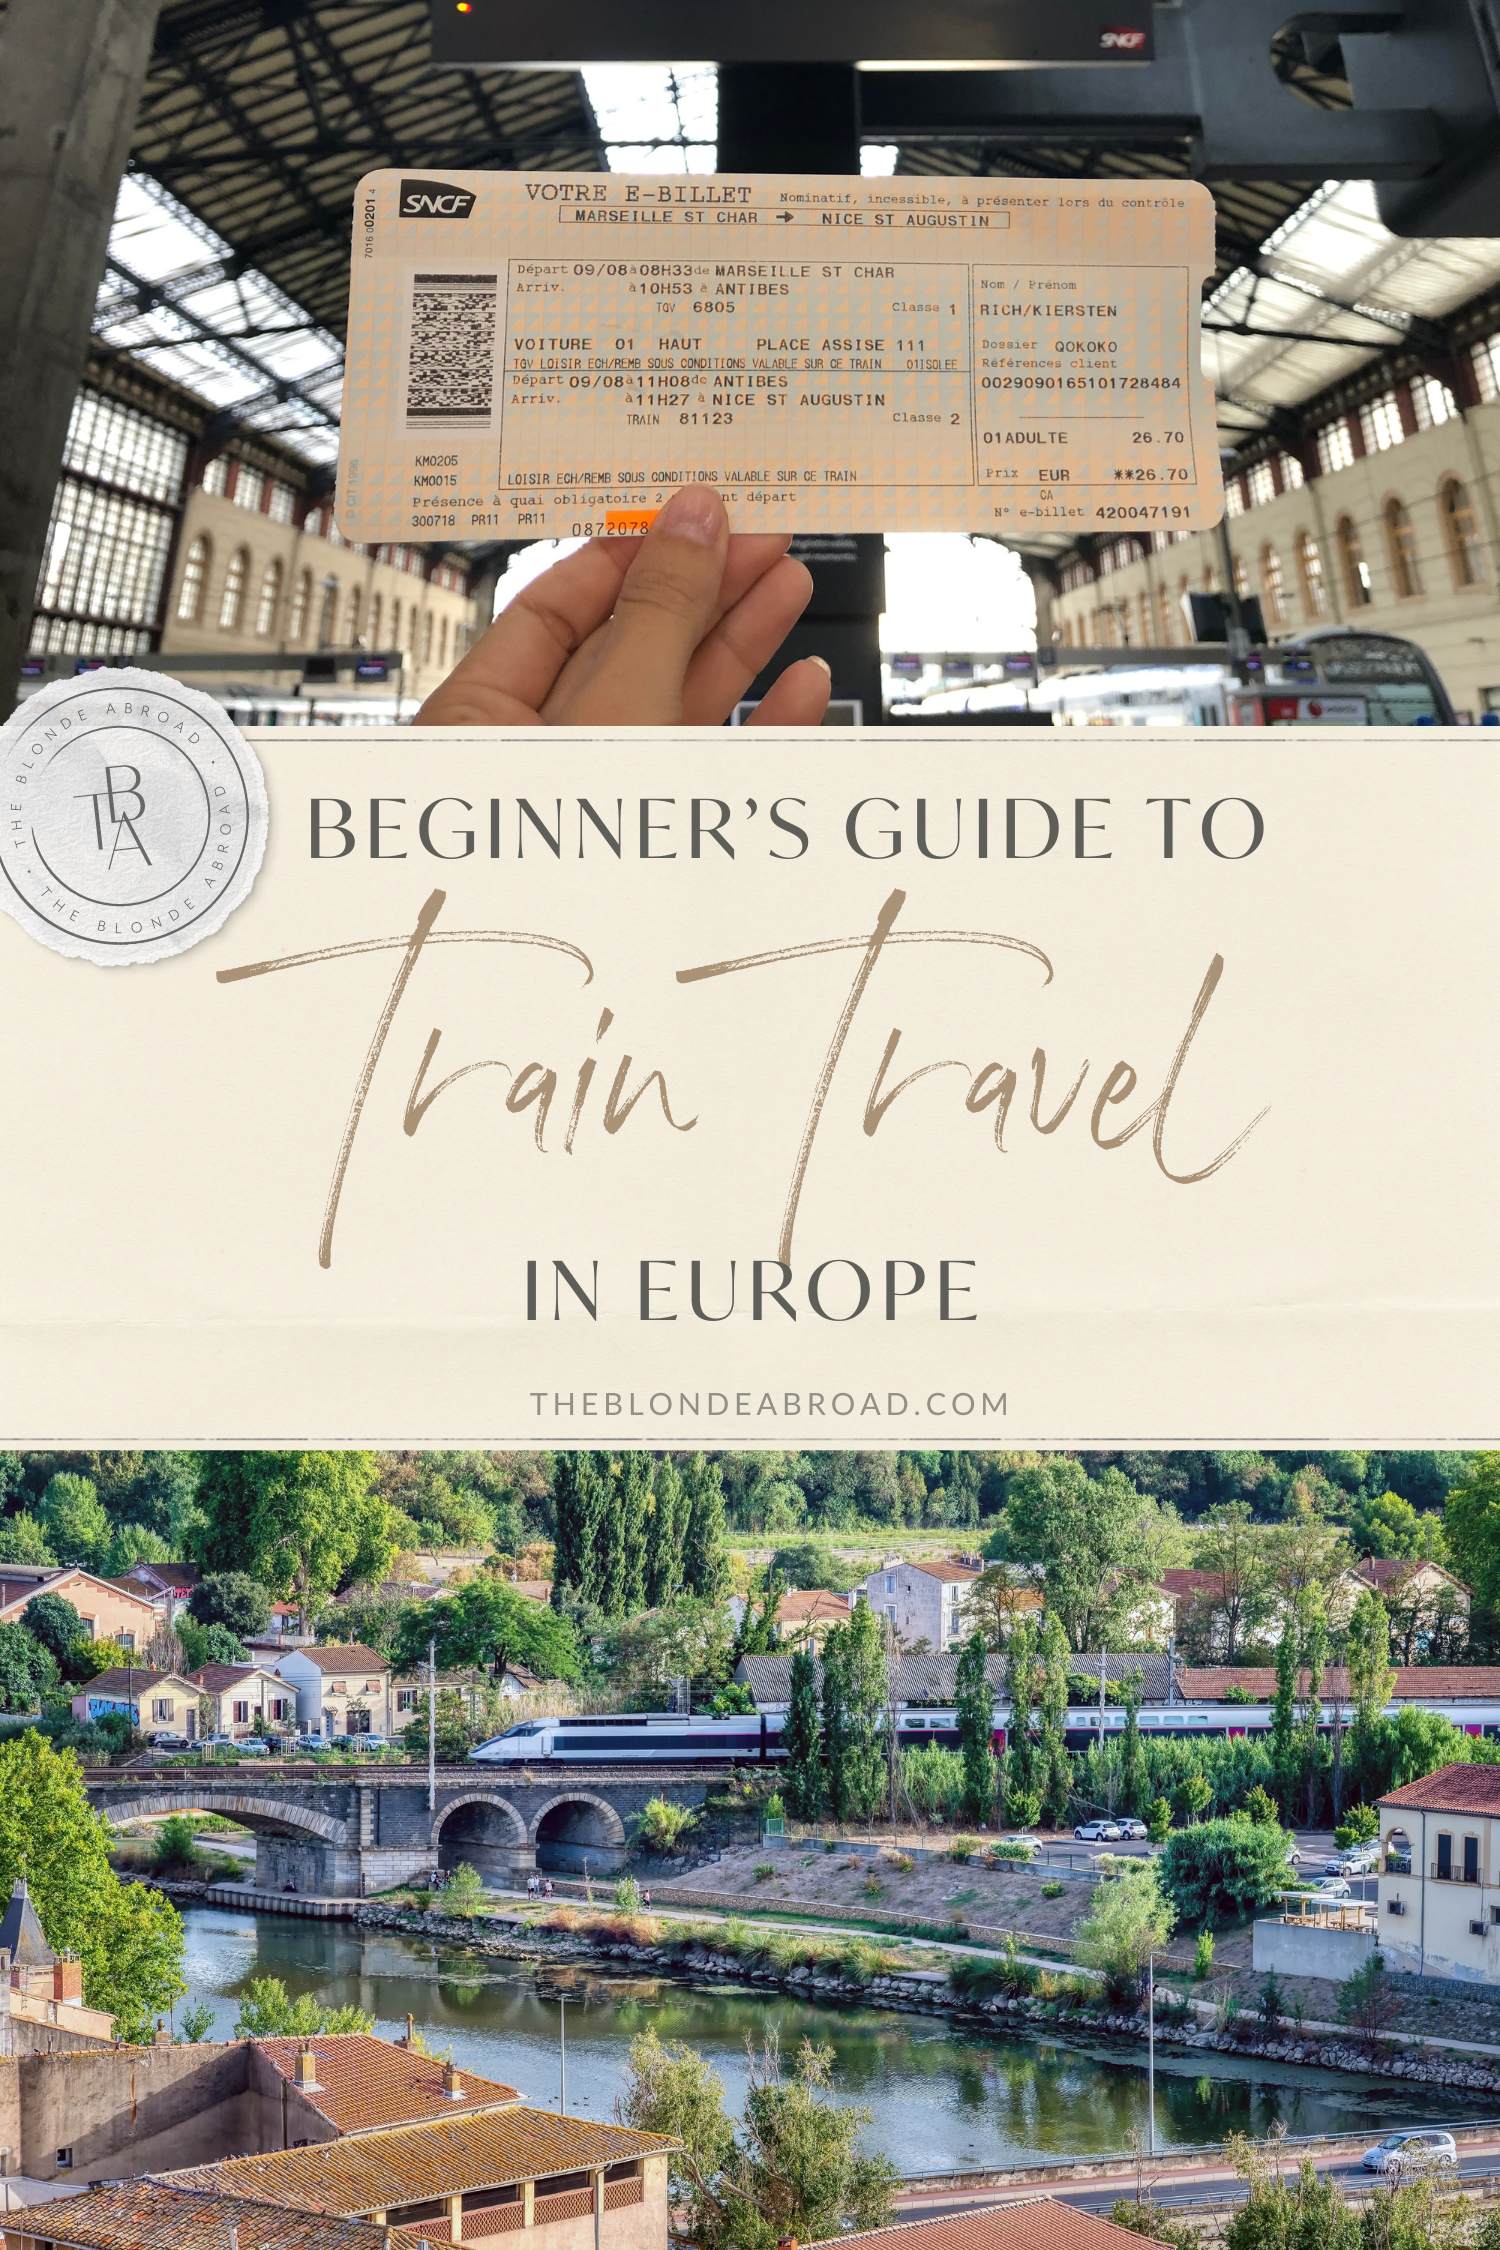 The Beginners Guide to Train Travel in Europe